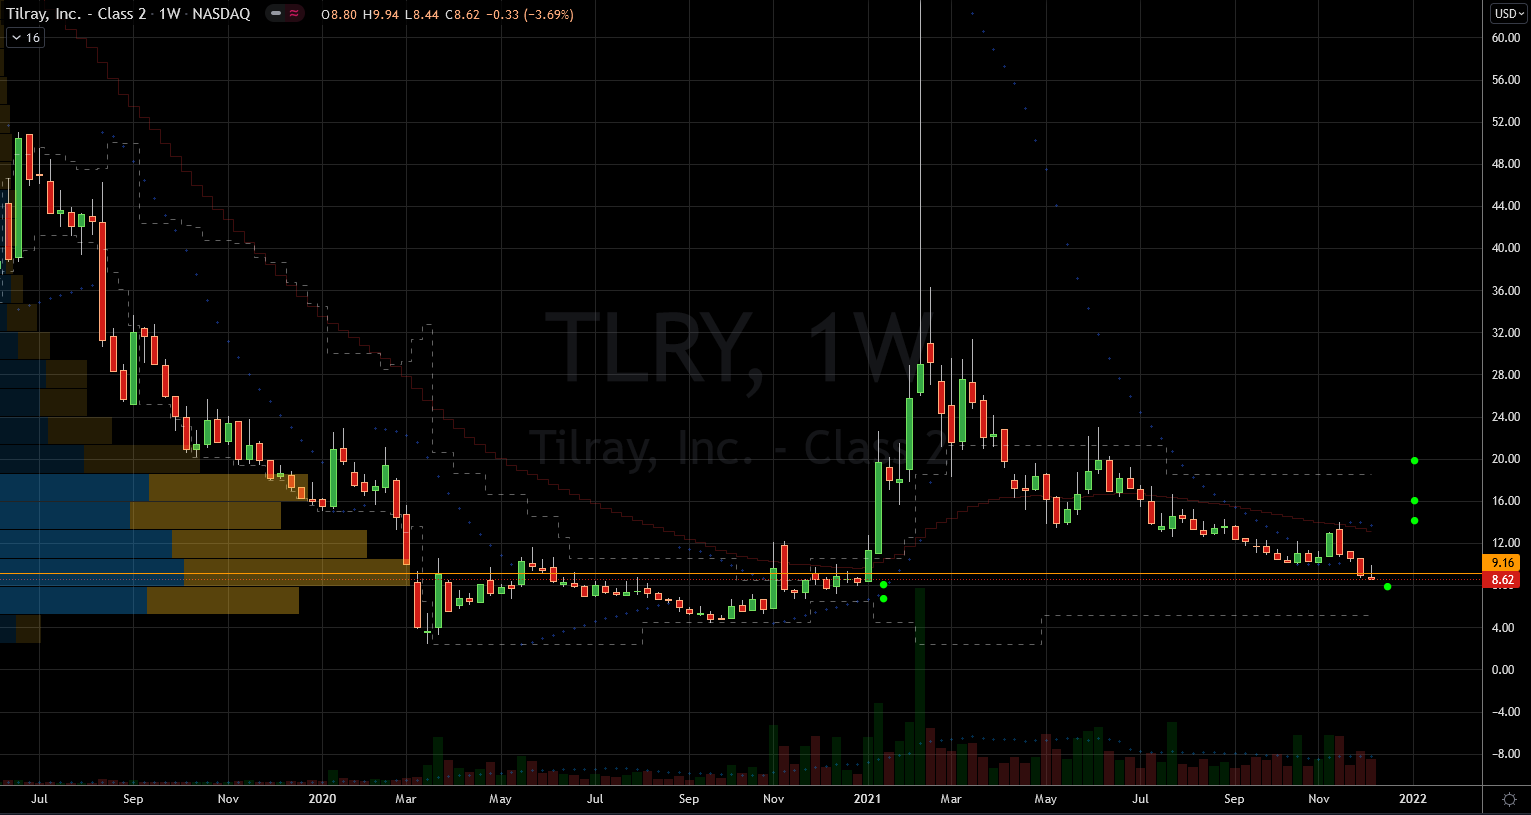 Stocks to Buy: Tilray (TLRY) Stock Chart Showing Potential Base